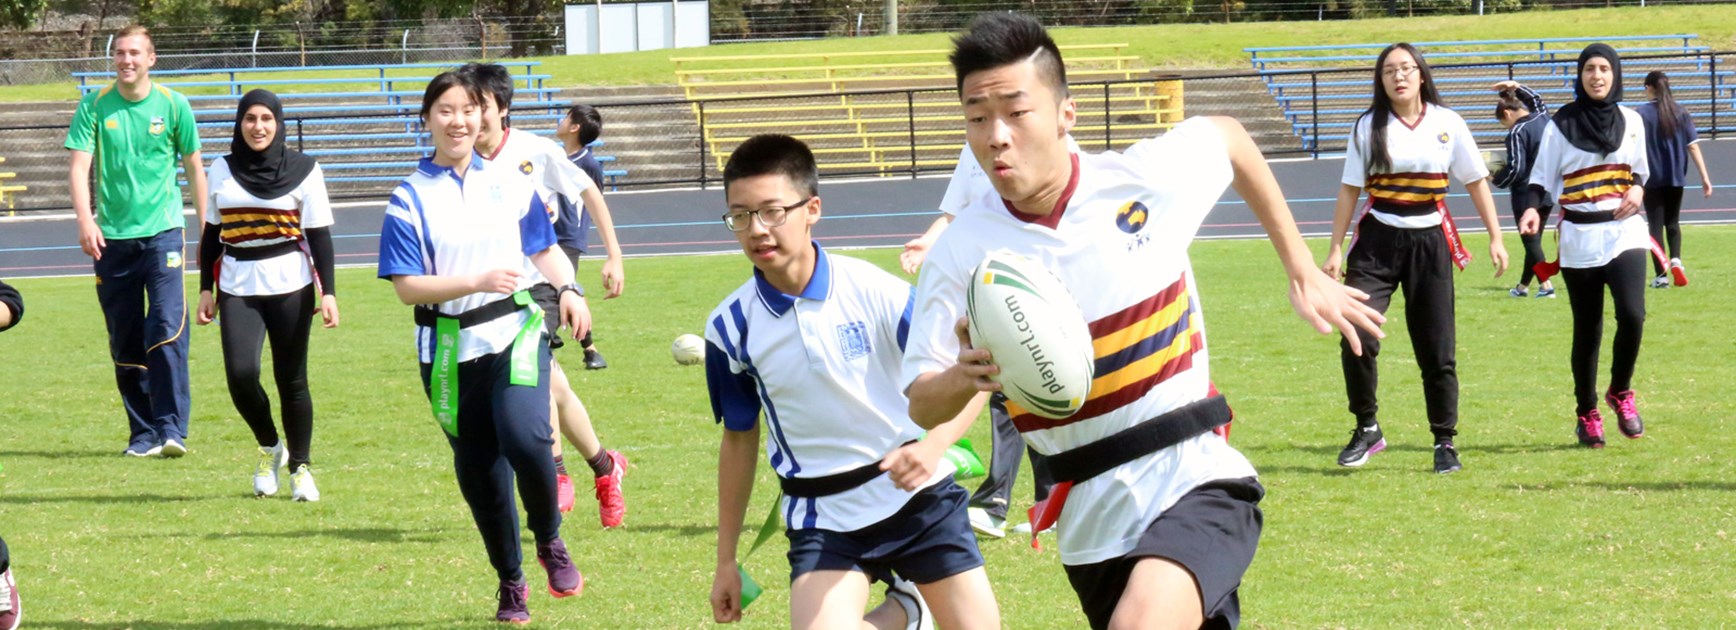 Kids get one of their first tastes of footy at a Gala Day as part the NRL's 'In Harmony In League' program.